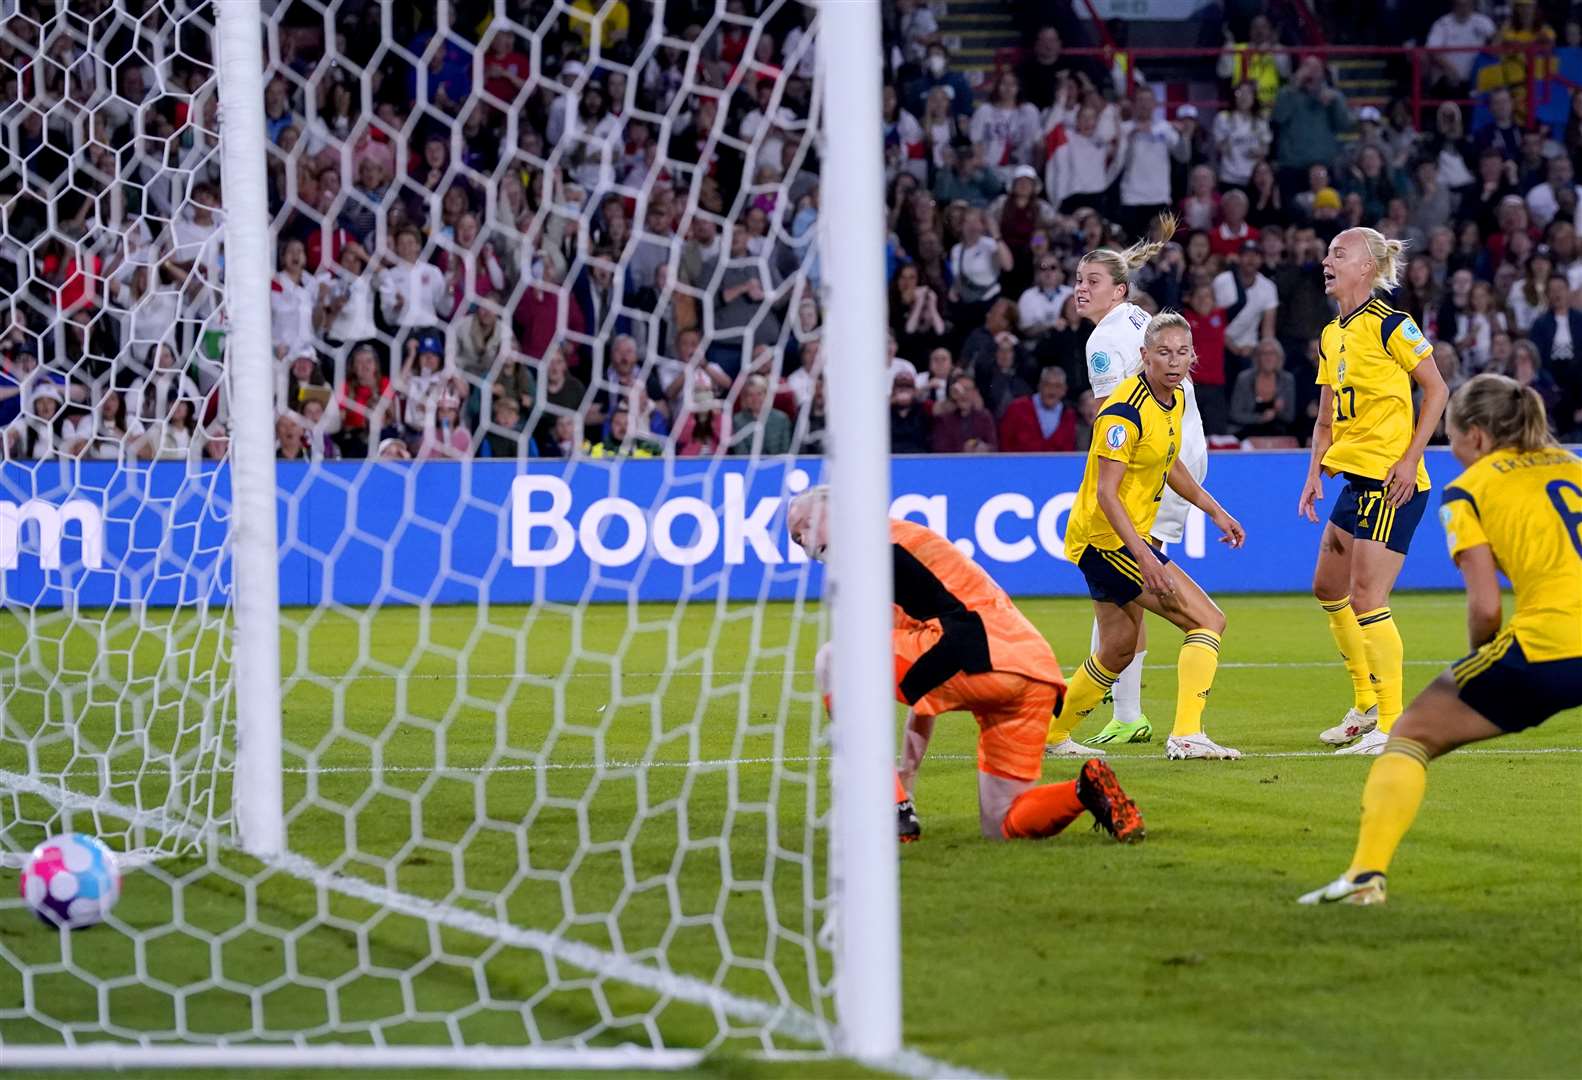 England's Alessia Russo scores their side's third goal in the UEFA Women's Euros 2022 semi-final match against Sweden at Sheffield United's Bramall Lane on Tuesday as England won 4-0. Picture: PA / Danny Lawson